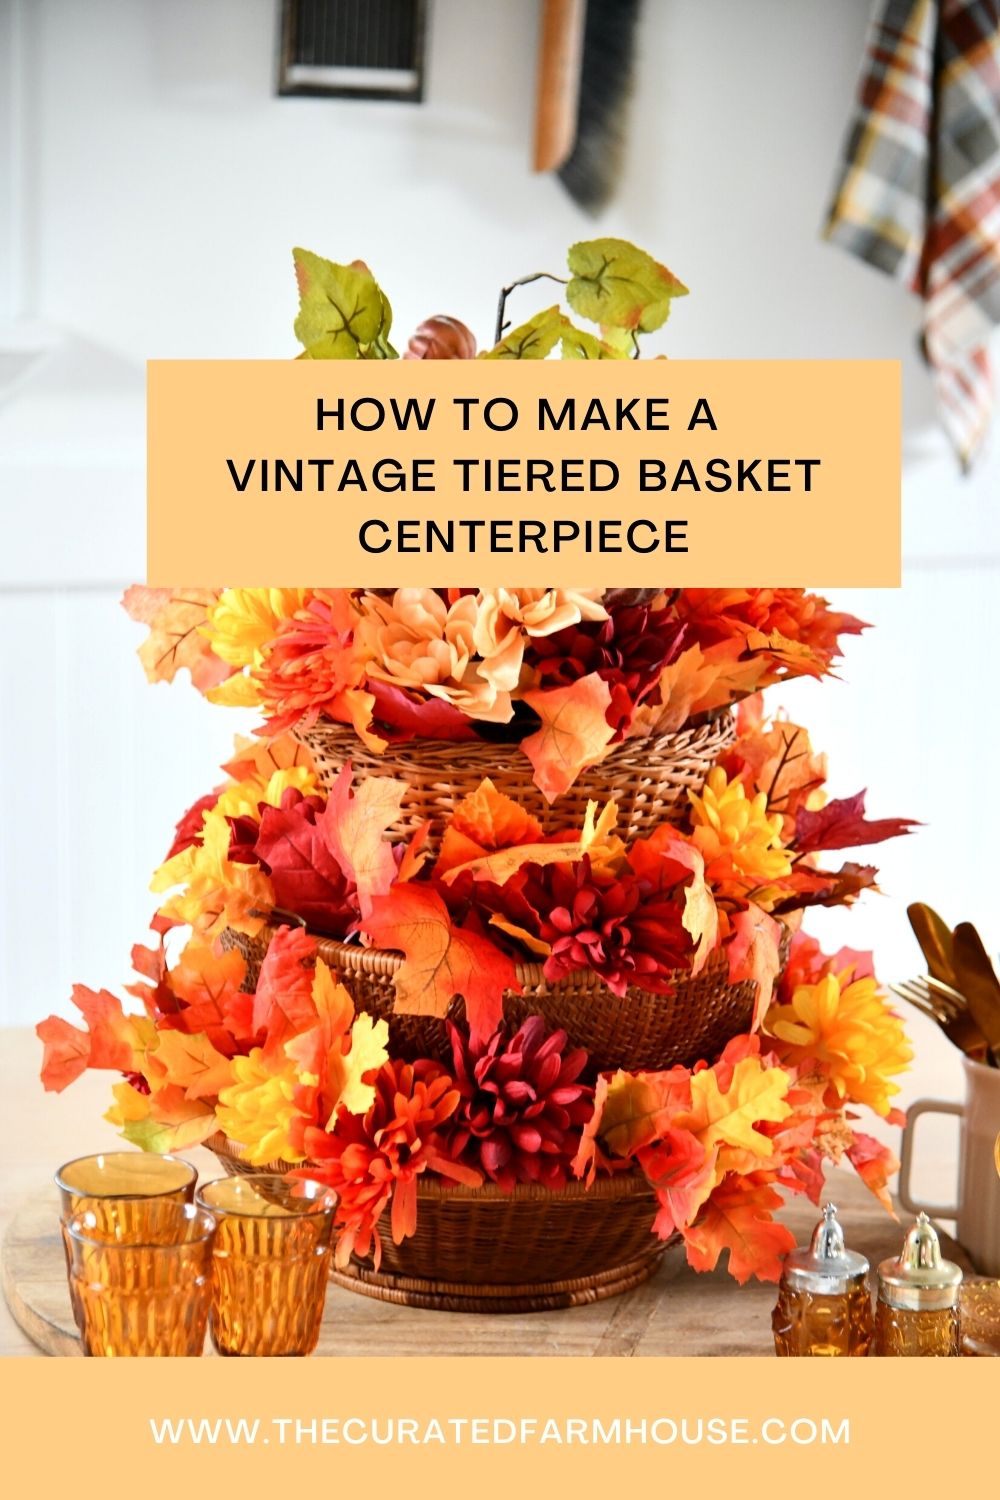 How To Make A Vintage Tiered Basket Centerpiece